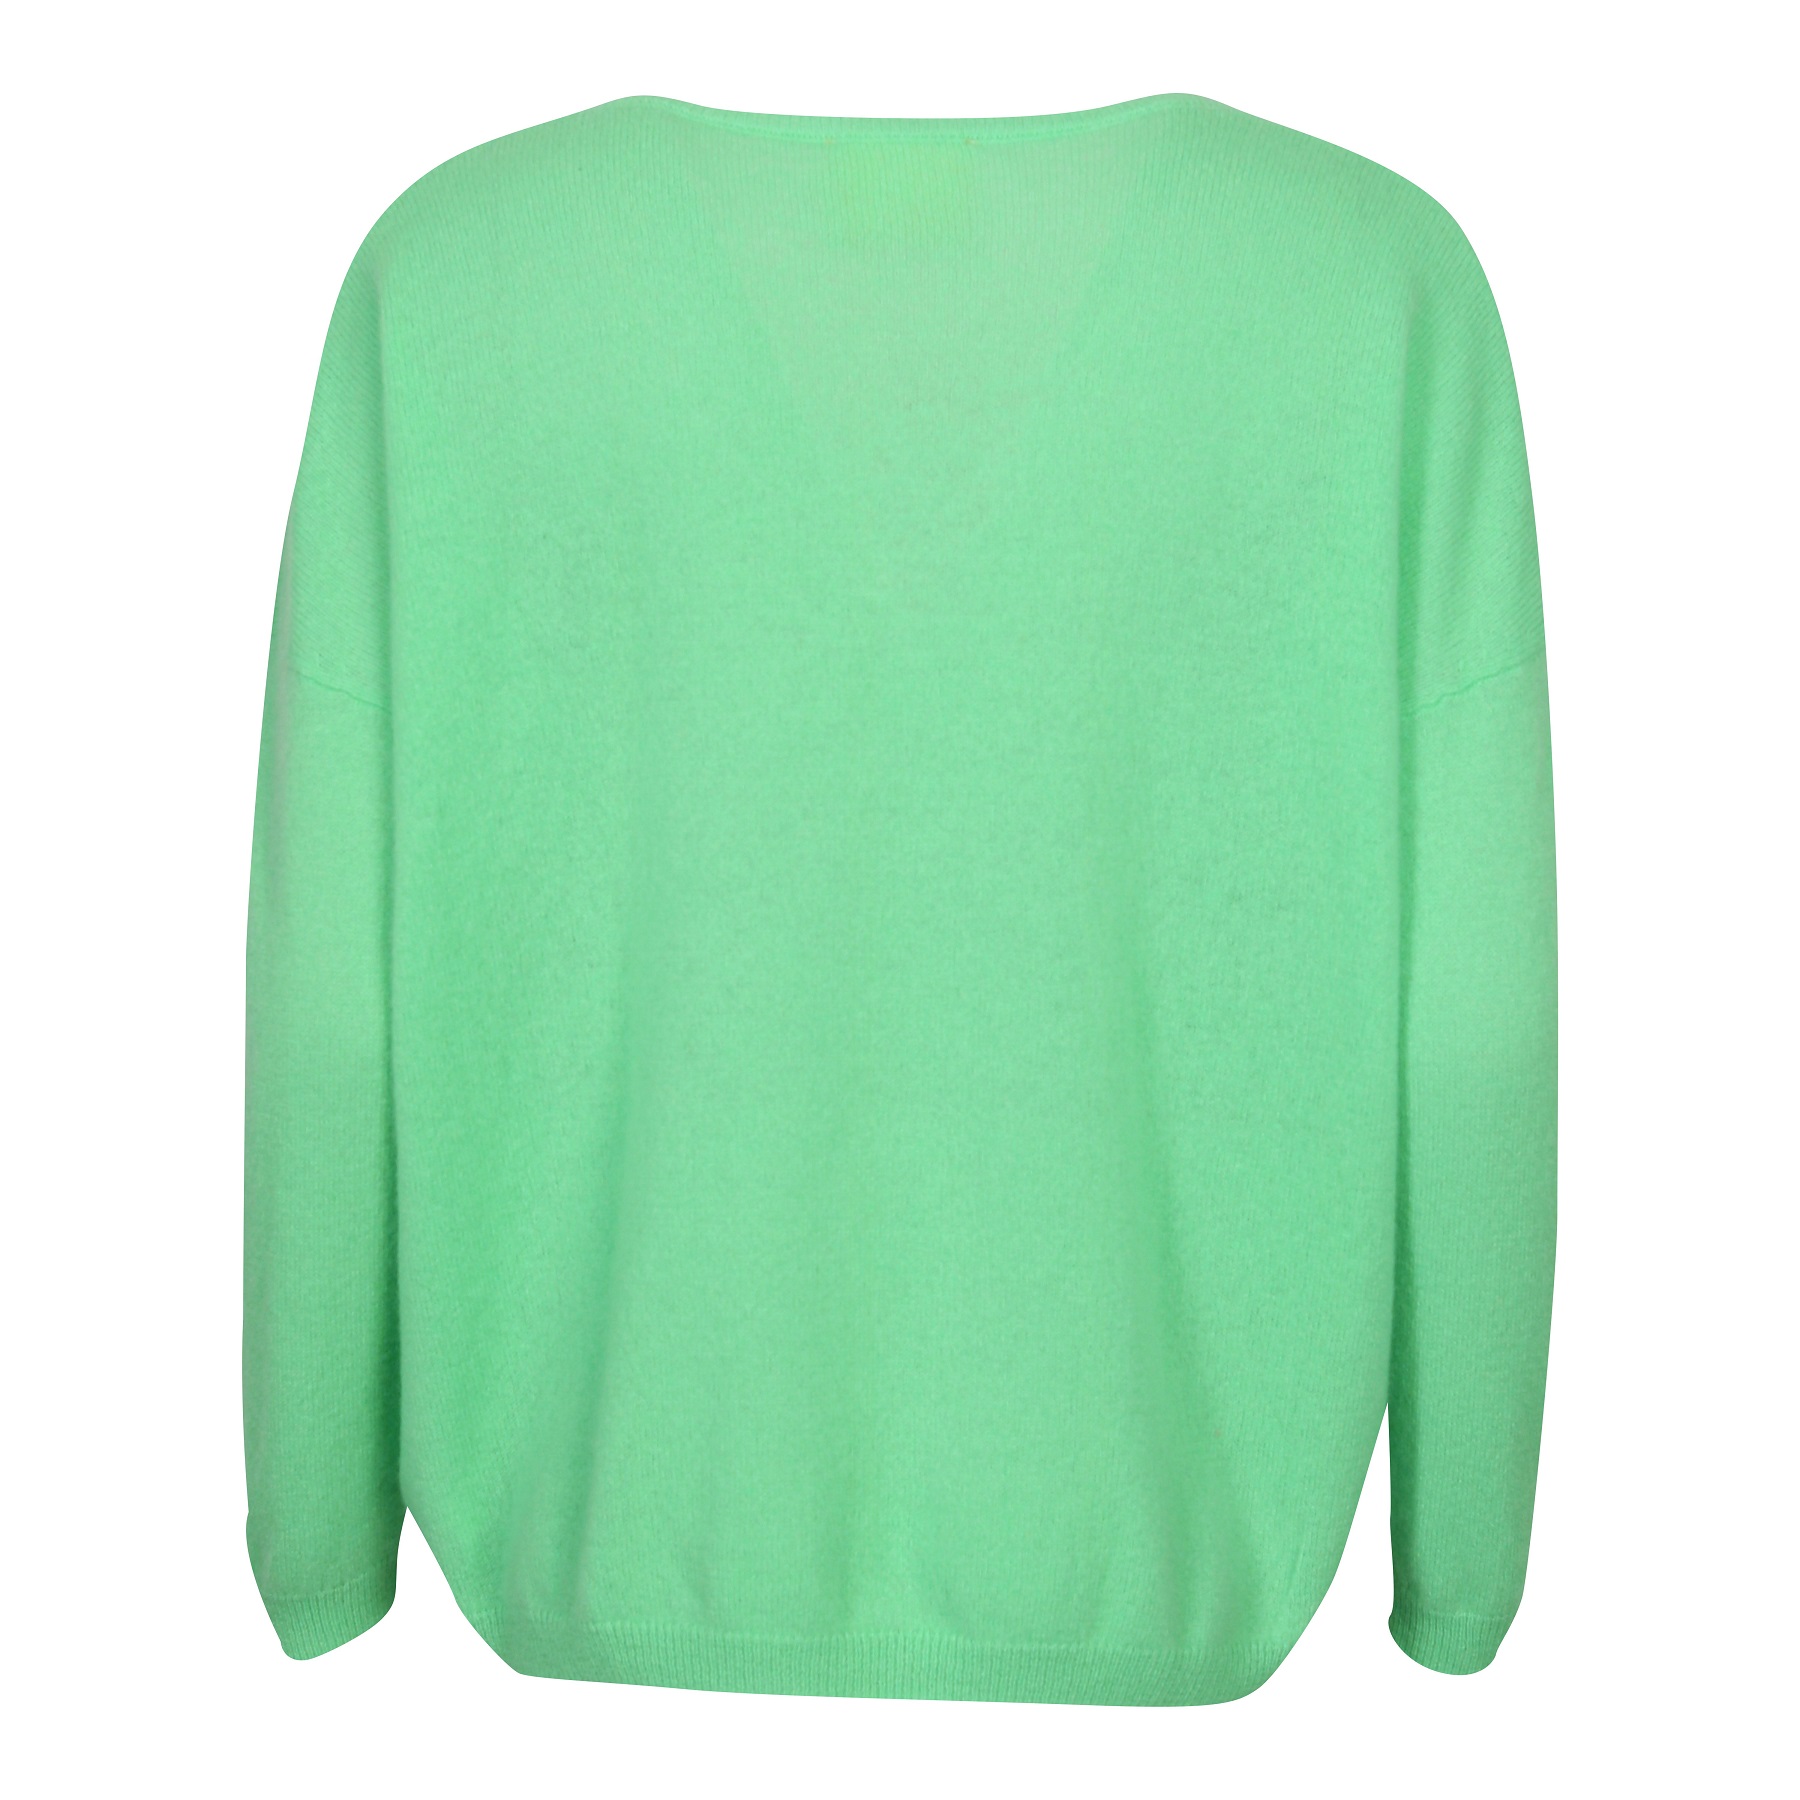 Absolut Cashmere Pullover Angele in Light Green L